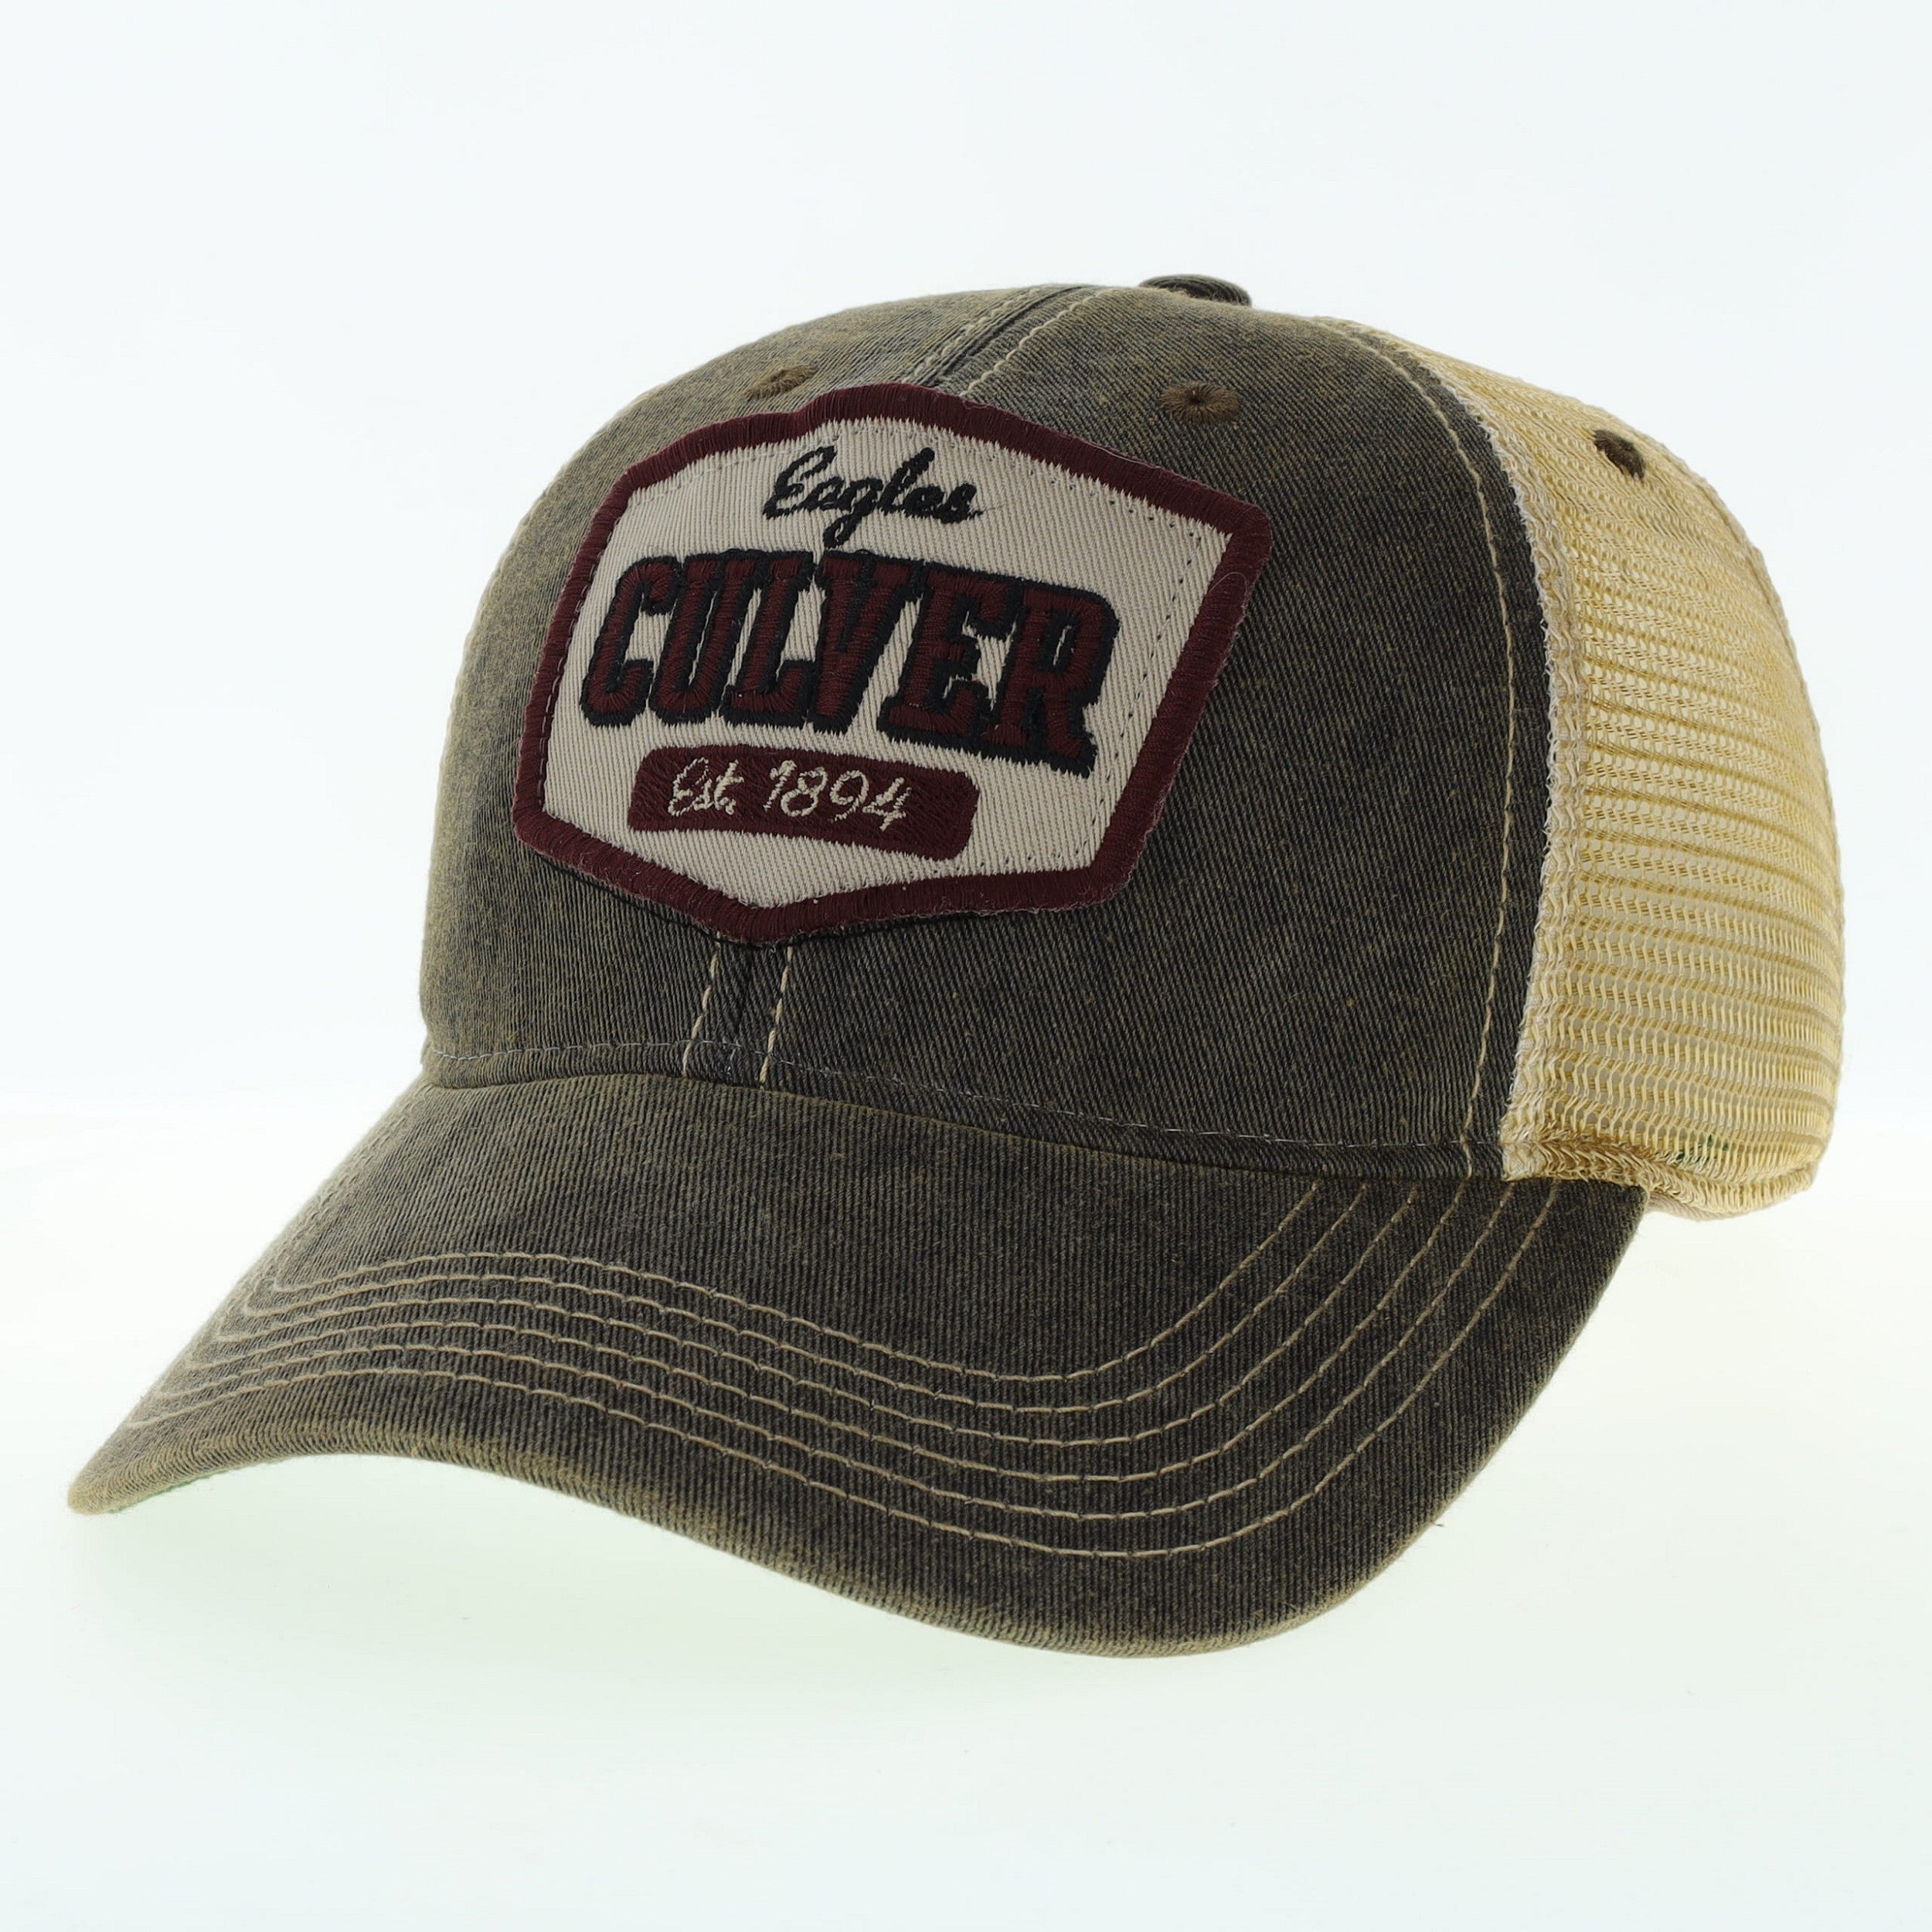 Youth Old Favorite Trucker Cap - Washed Black with Patch